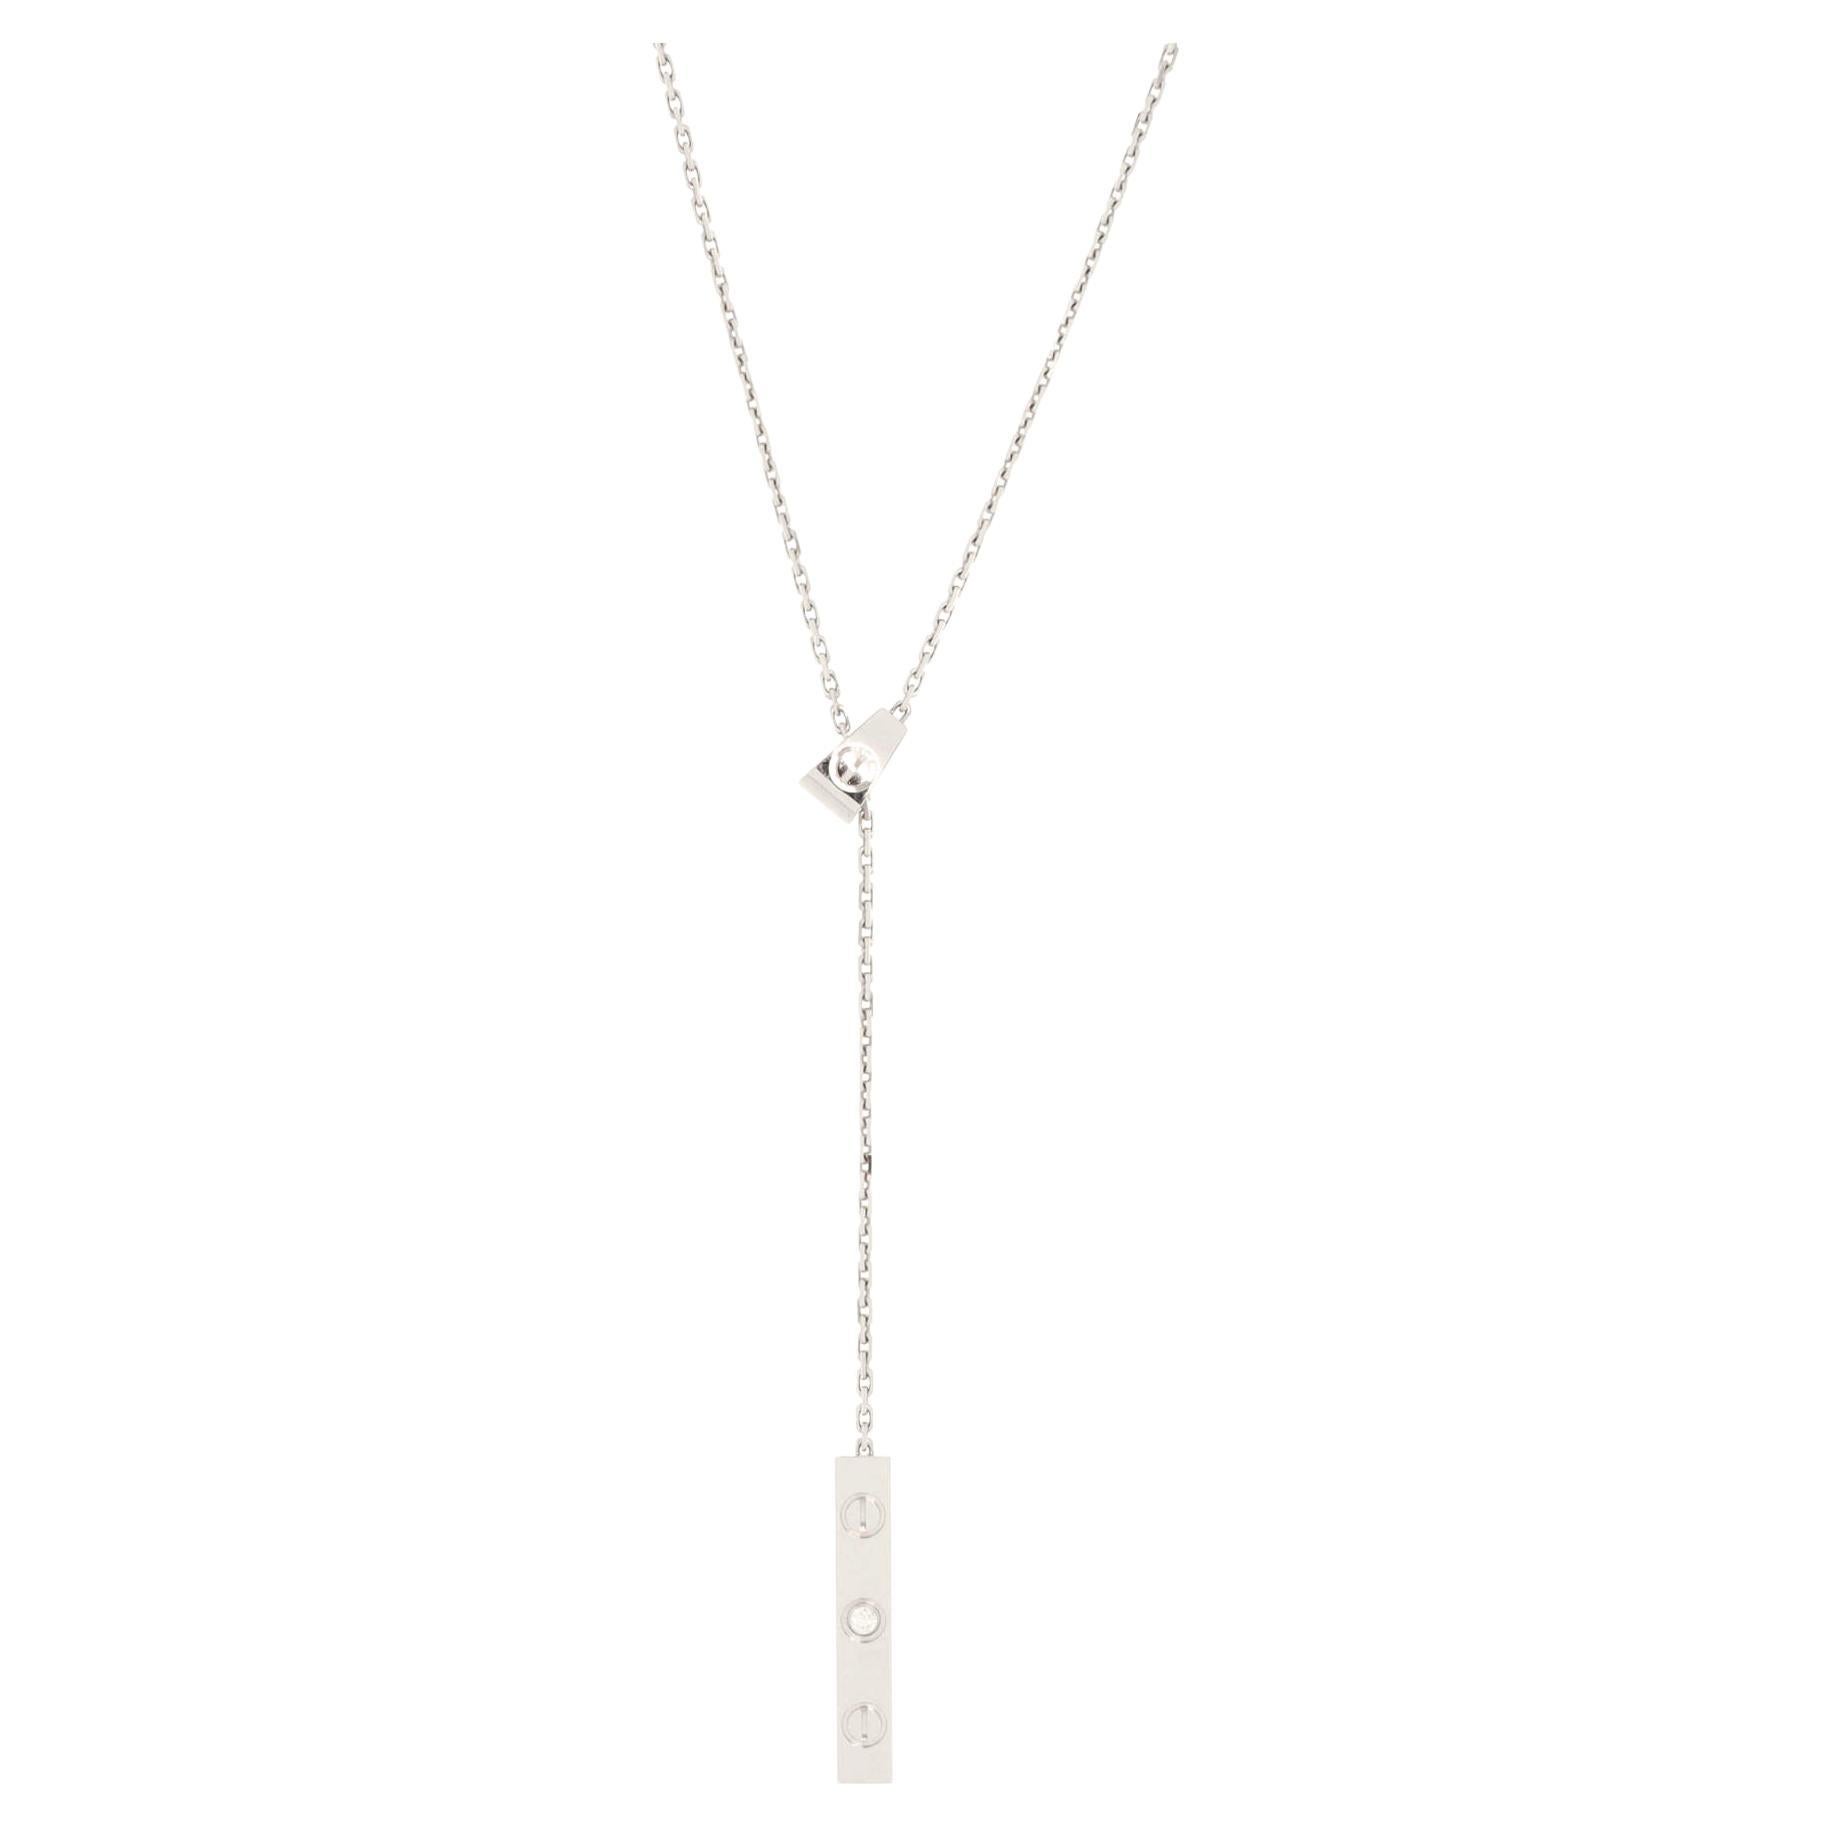 Cartier Love Lariat Necklace 18K White Gold with Diamond